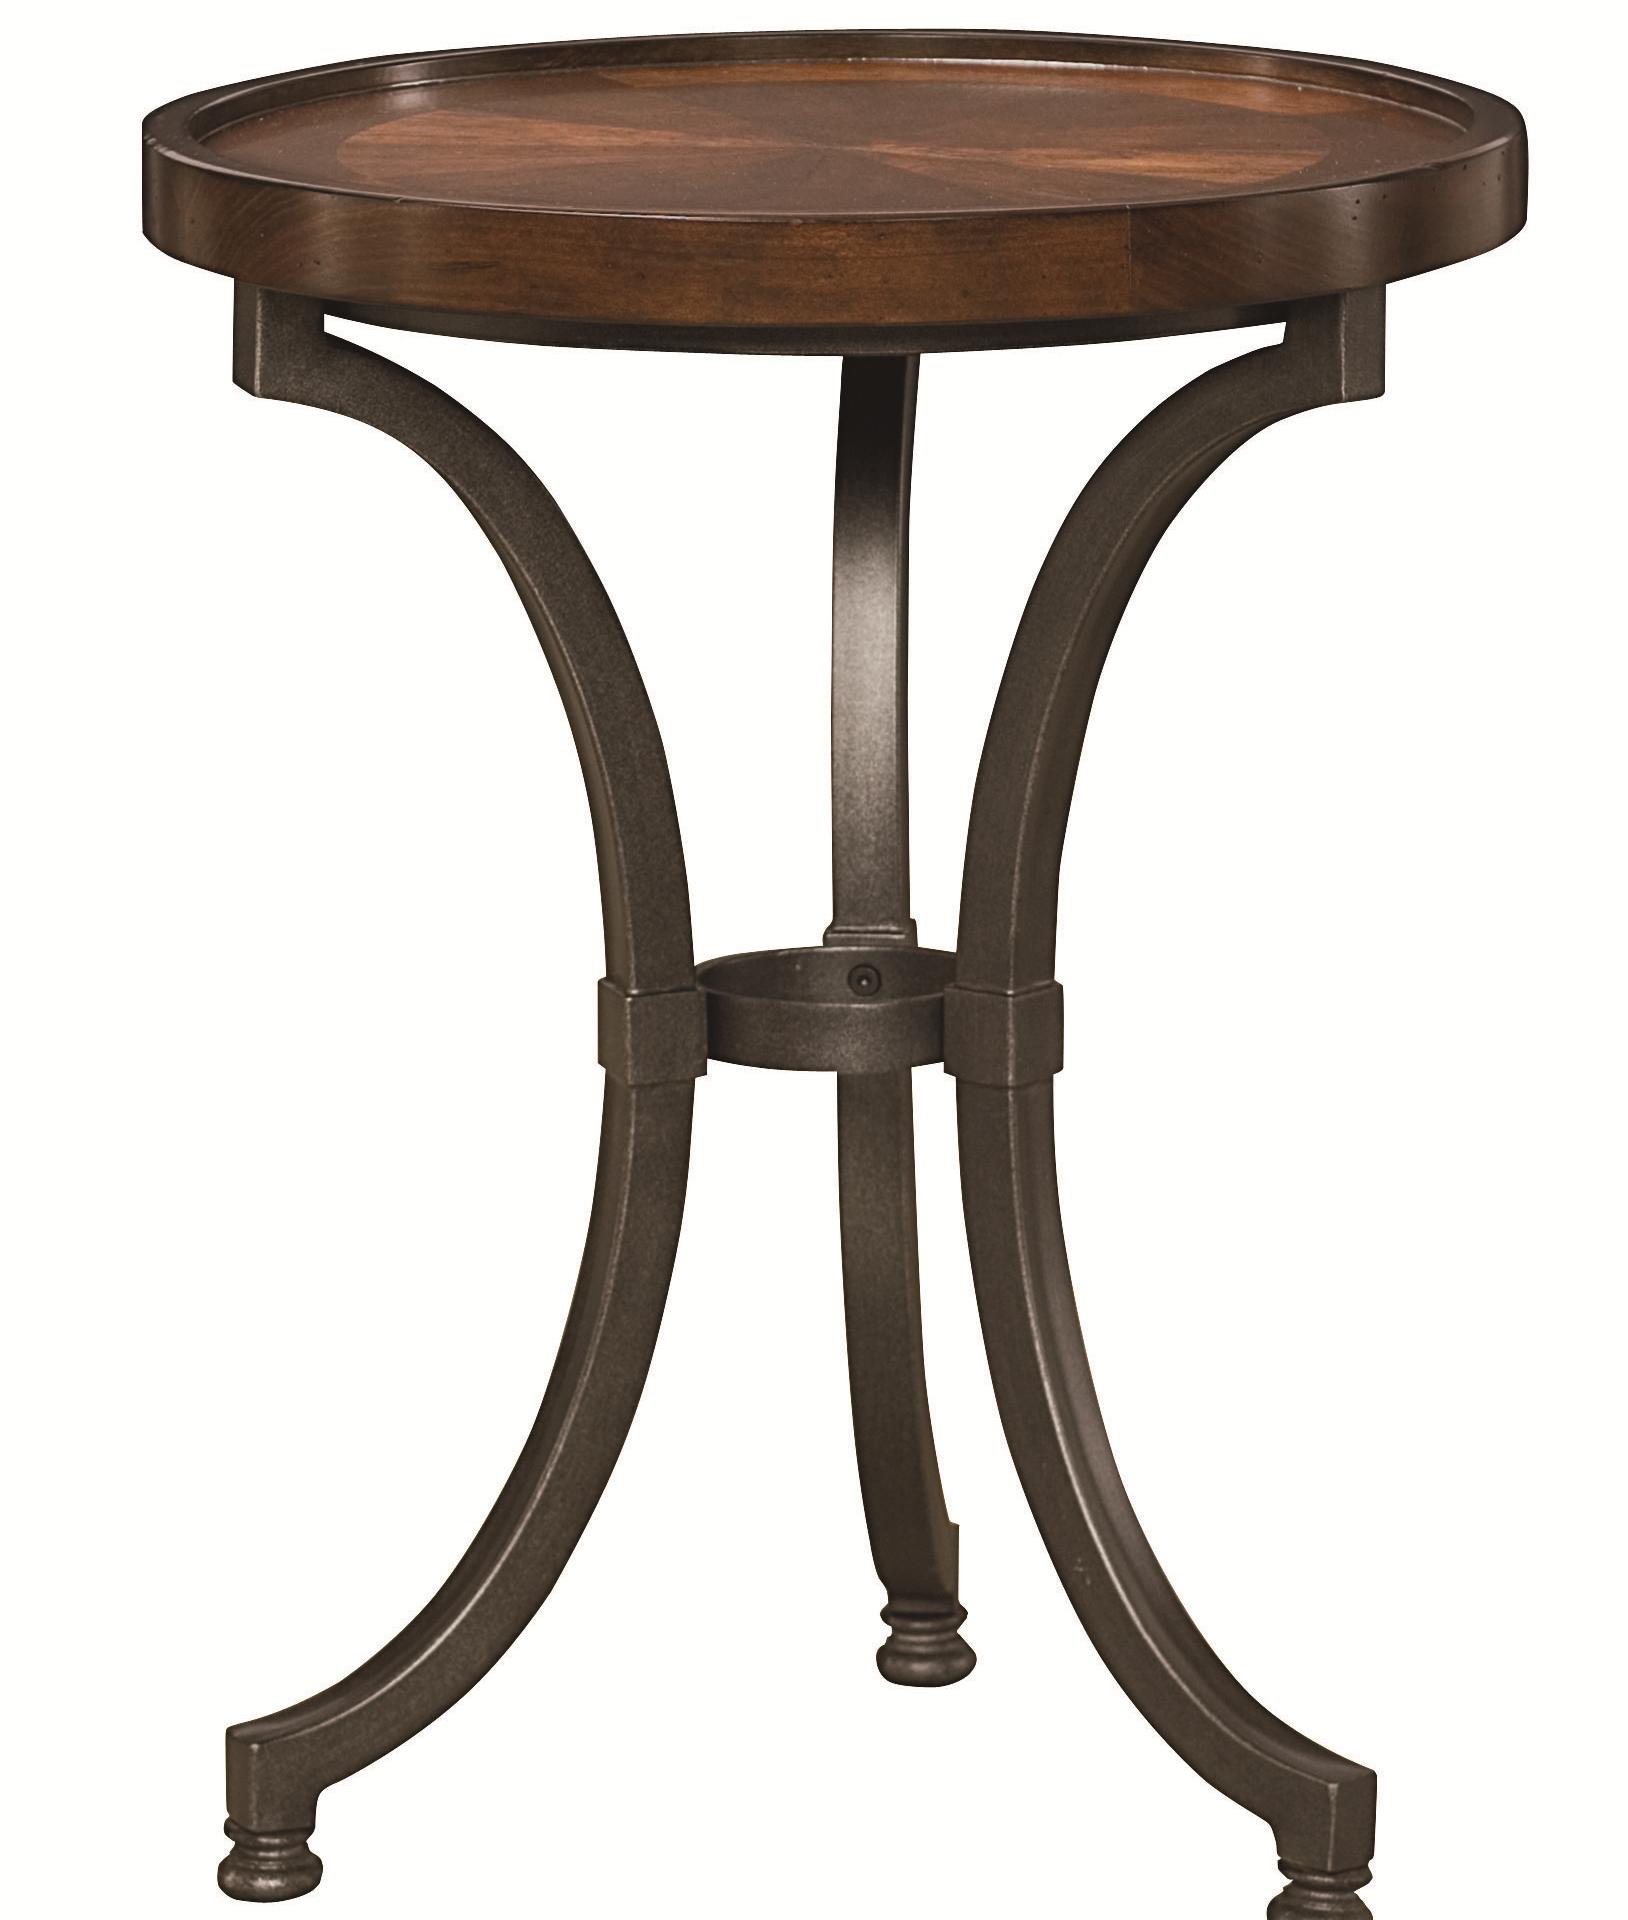 hammary barrow round chairside table with metal base products color oak accent best patio furniture black and wood coffee tables distressed mirror jcpenney couches square side